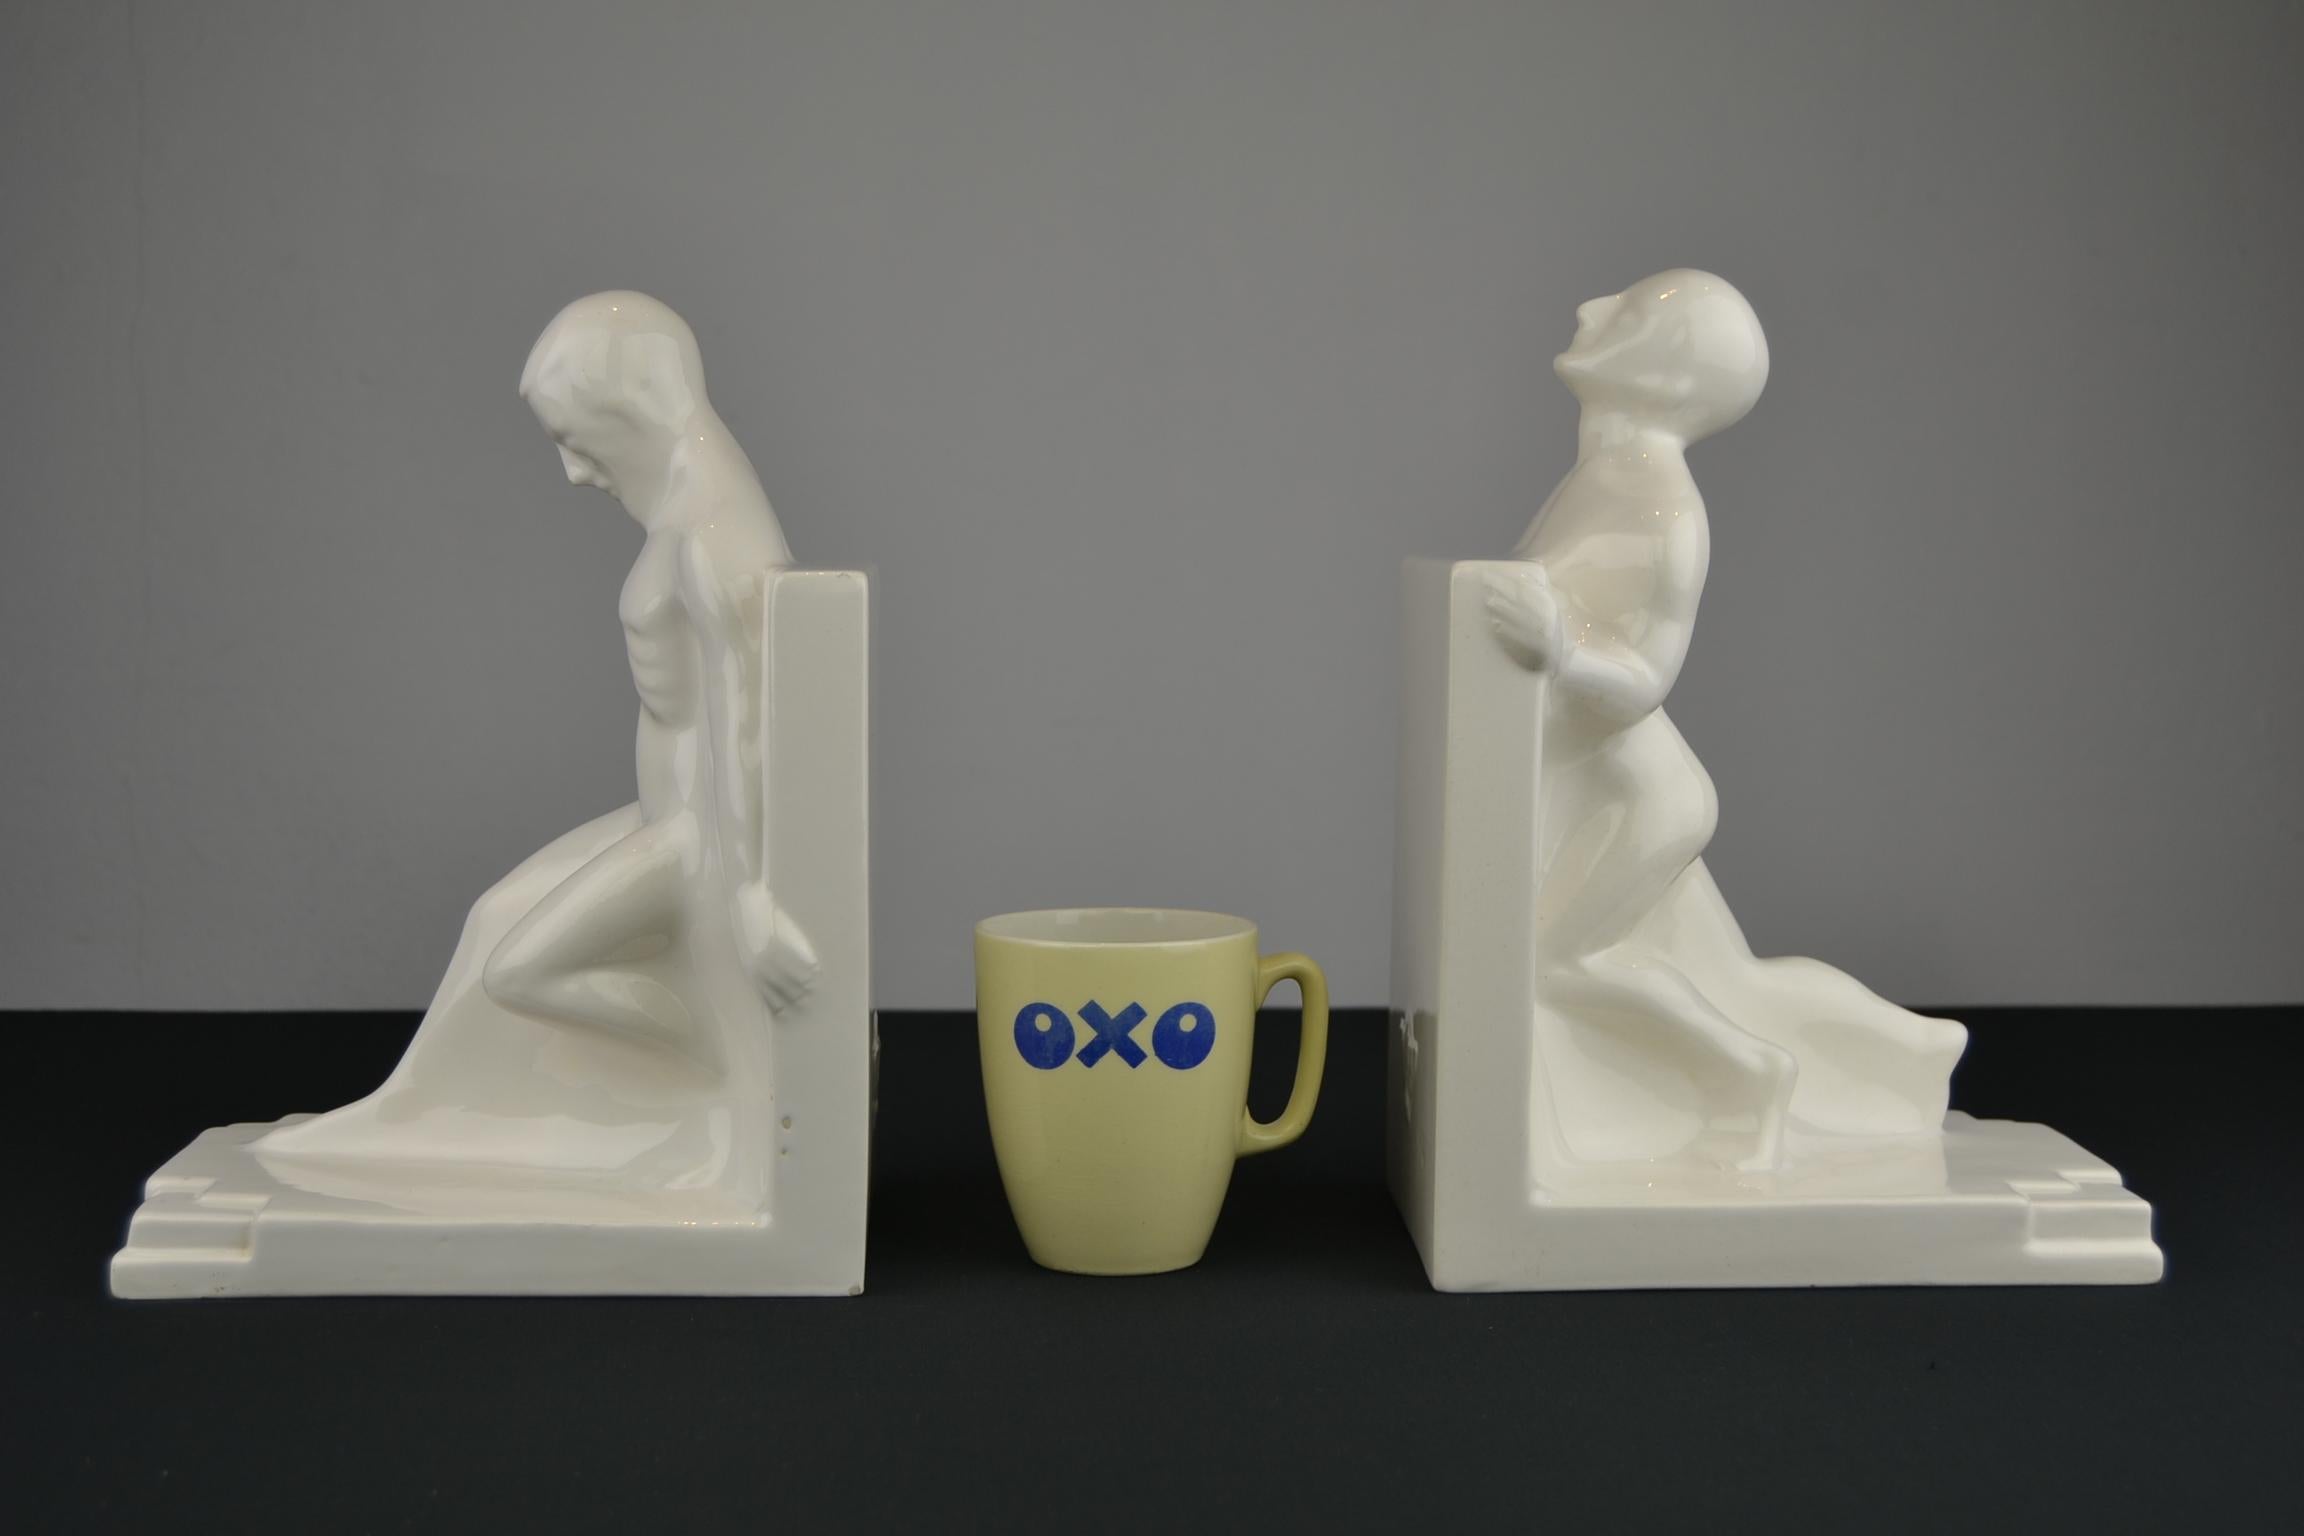 Large Art Deco bookends of nude muscular man in white glazed ceramic.
These spectacular set of Large Bookends were Designed by Godefridus Boonekamp in the 1920s and made in the Netherlands by Plateelbakkerij Schoonhoven, circa 1930s. 

As these